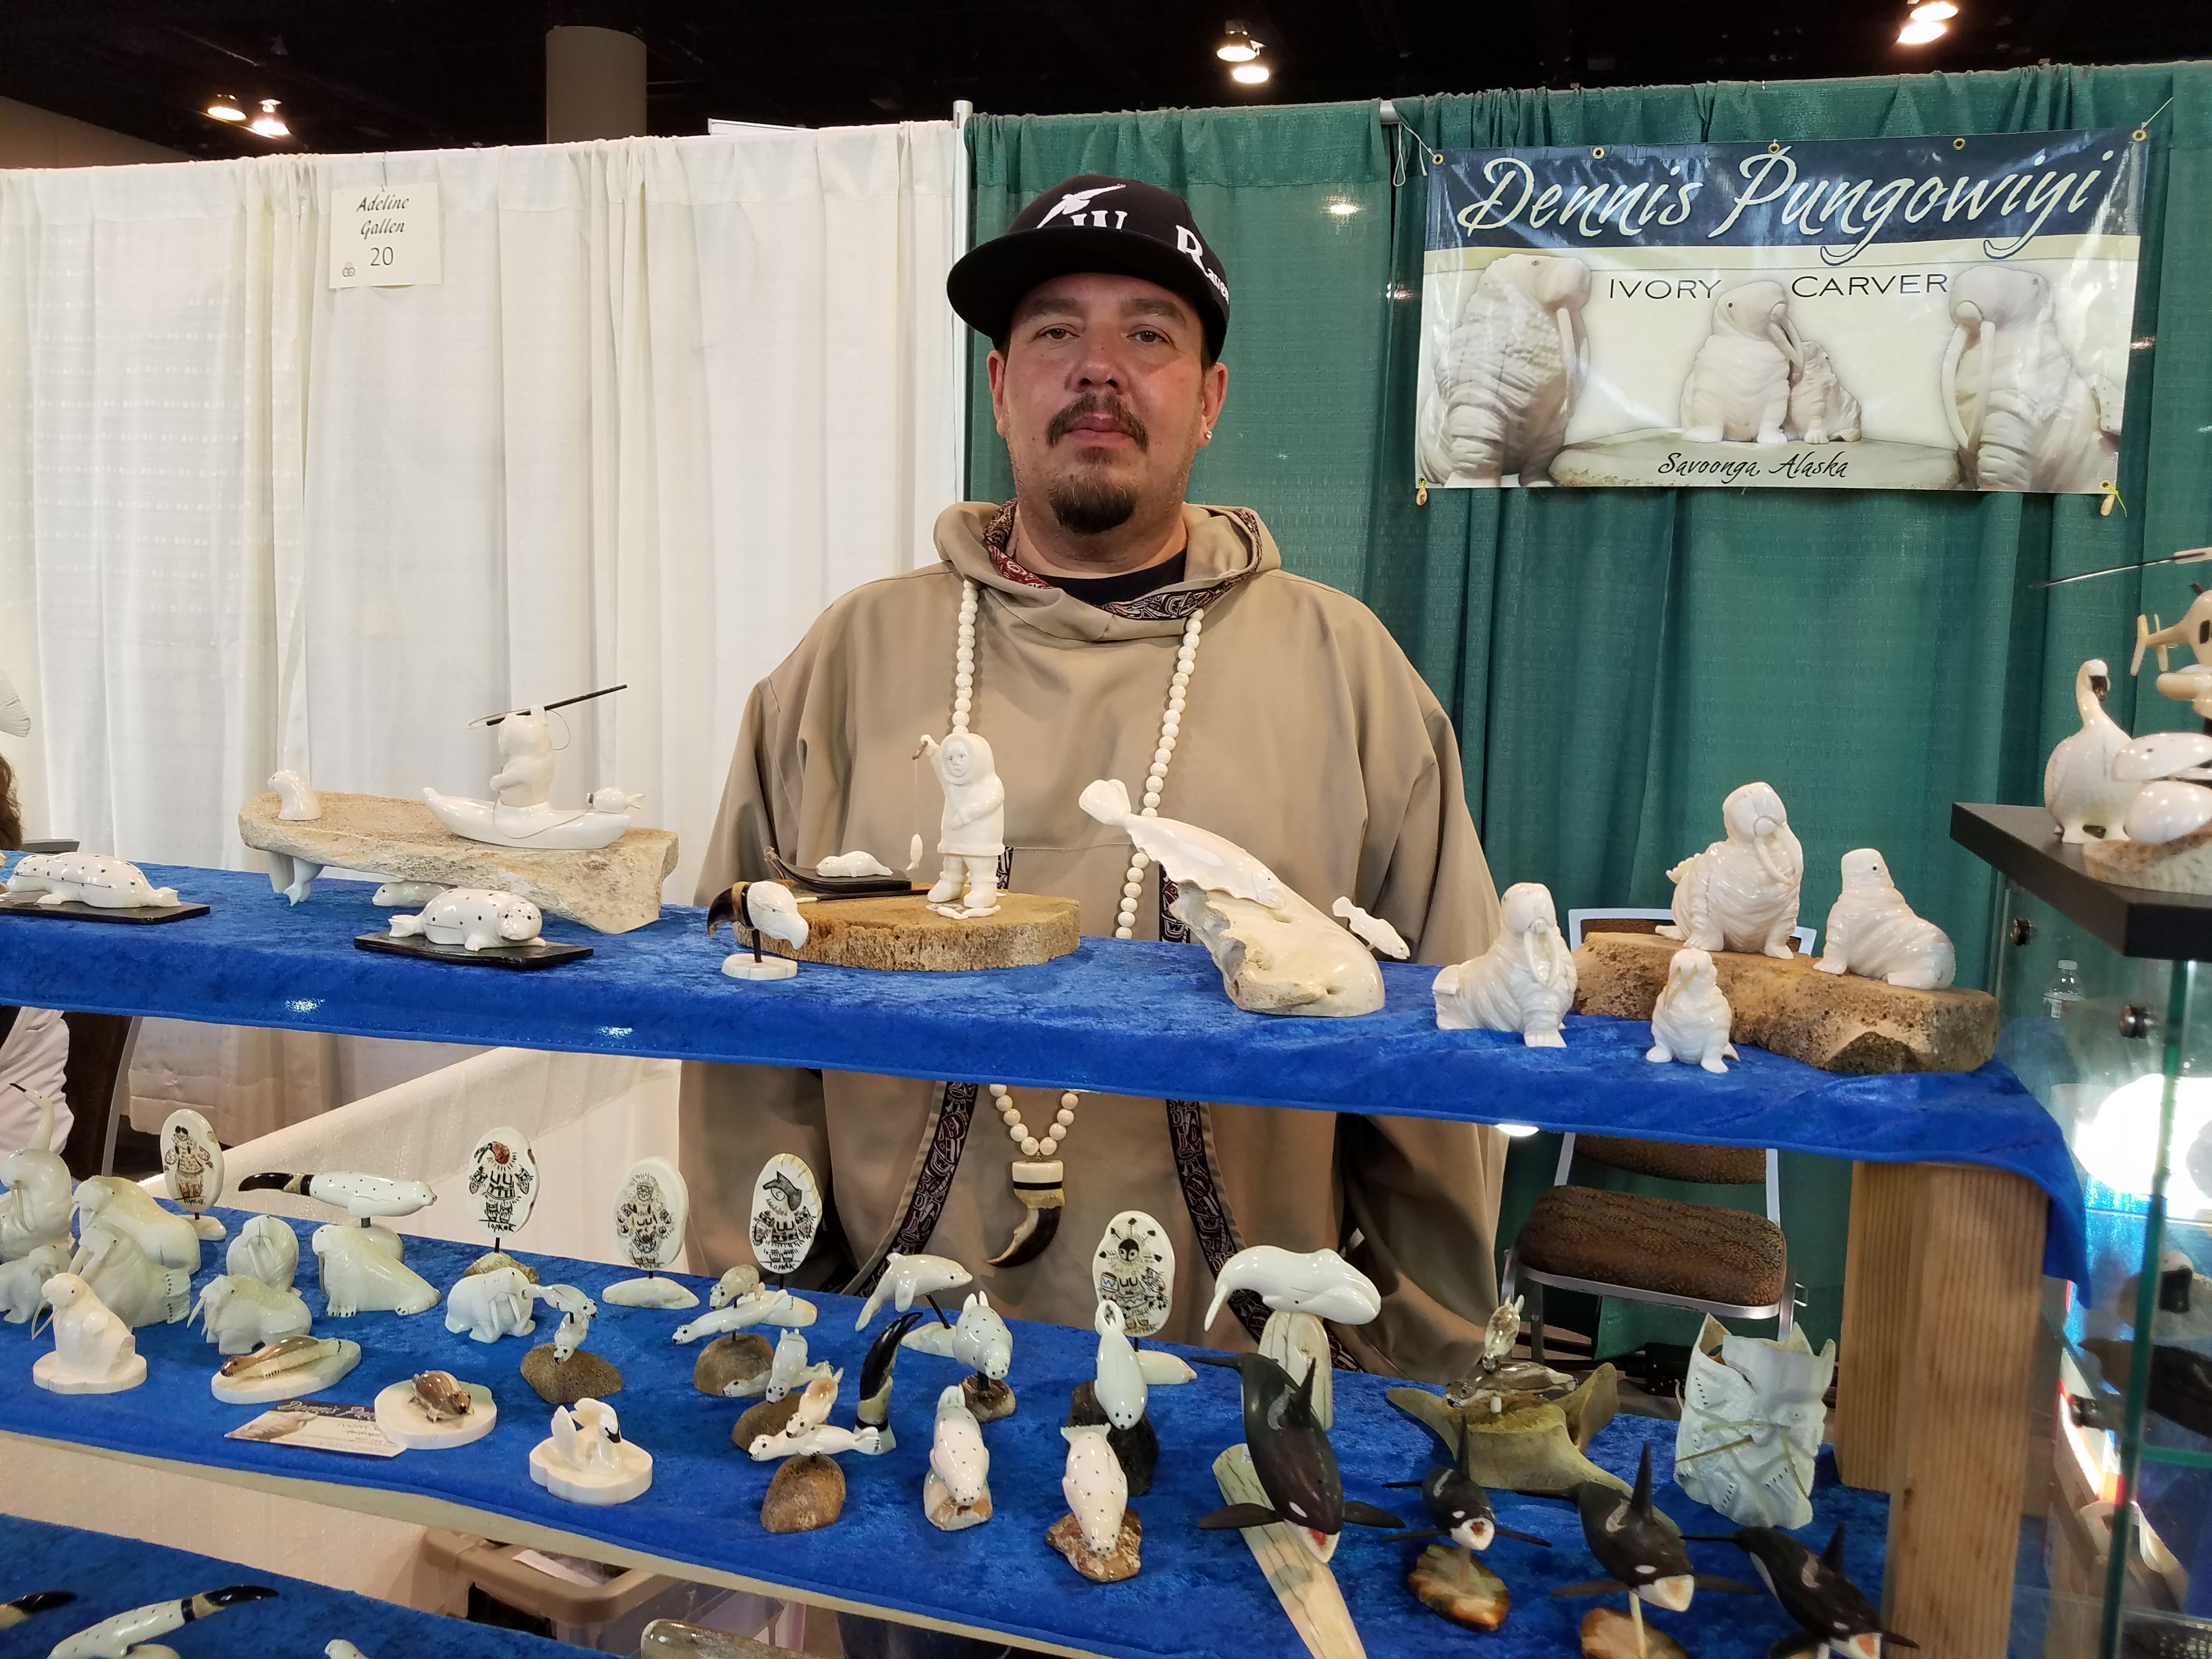 Dennis Pungowiyi, an Alaska Native carver from St. Lawrence Island, said sales of his carvings have decreased sharply as a perception has grown among potential customers that owning one might be illegal. (Yereth Rosen / Arctic Now)